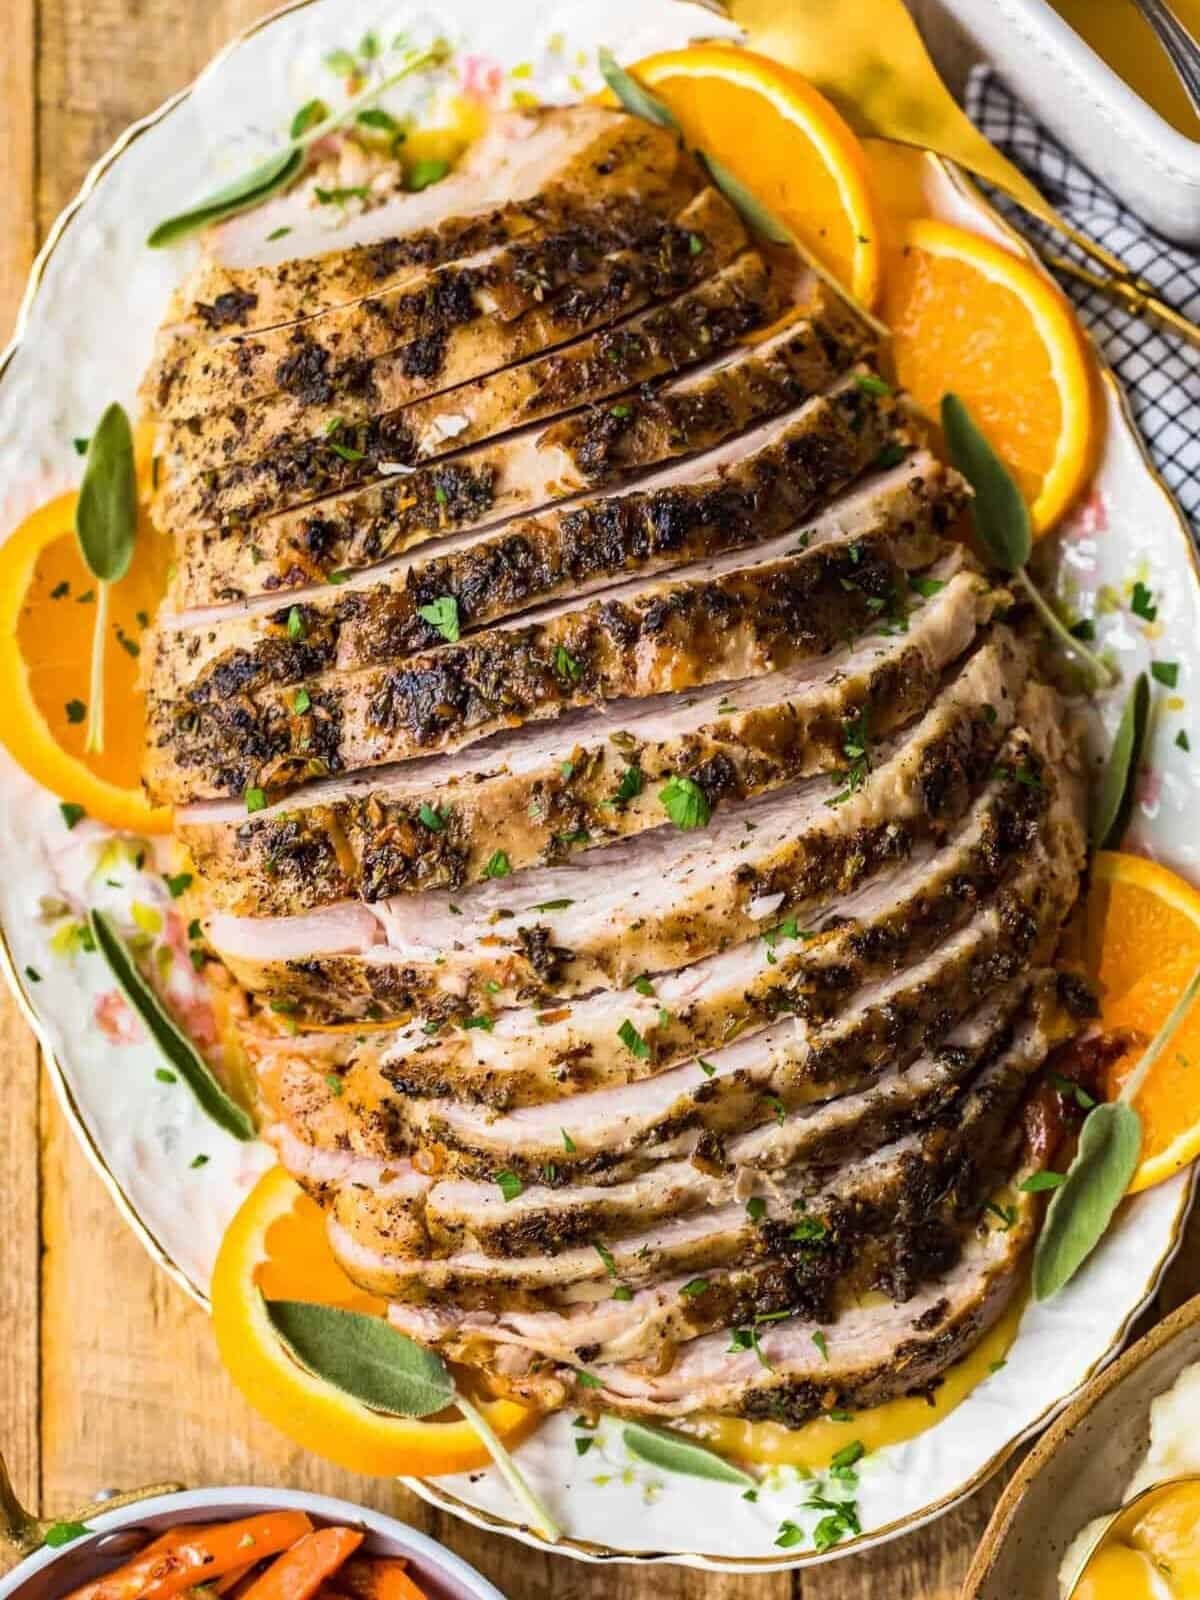 Top shot of sliced turkey breast on a serving plate